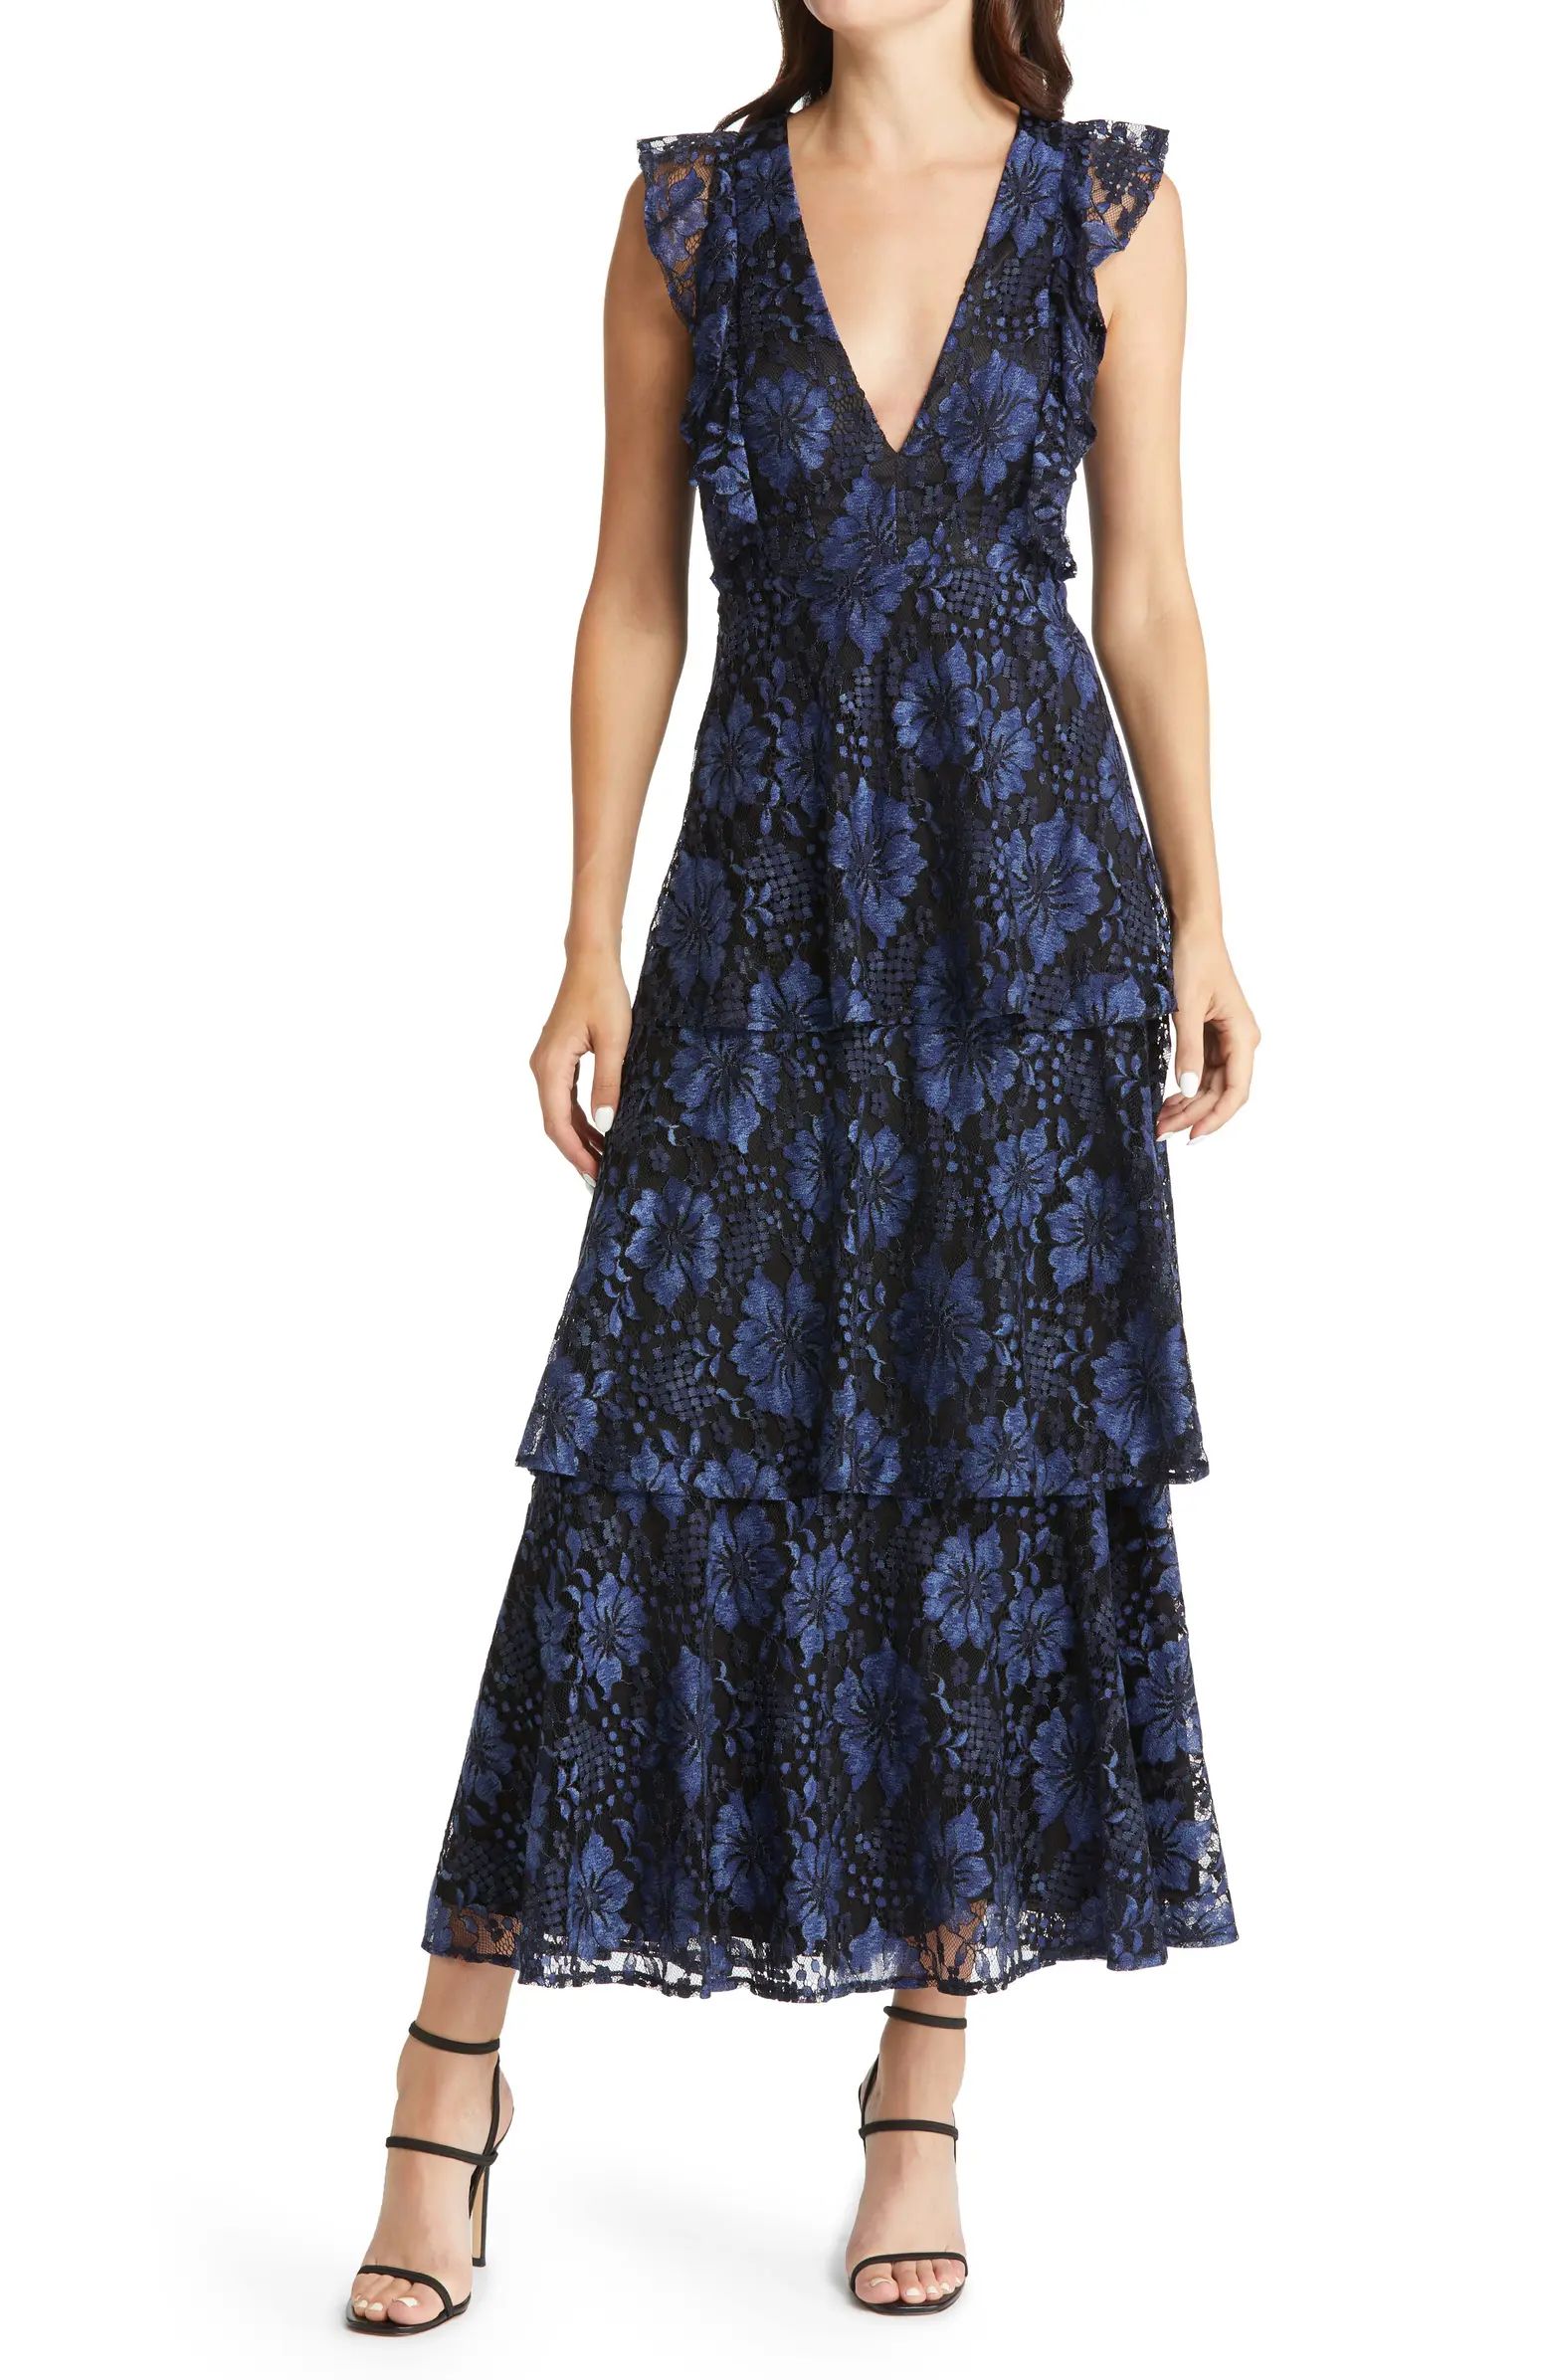 Lulus Molinetto Lace Ruffle Dress | Nordstrom | Nordstrom